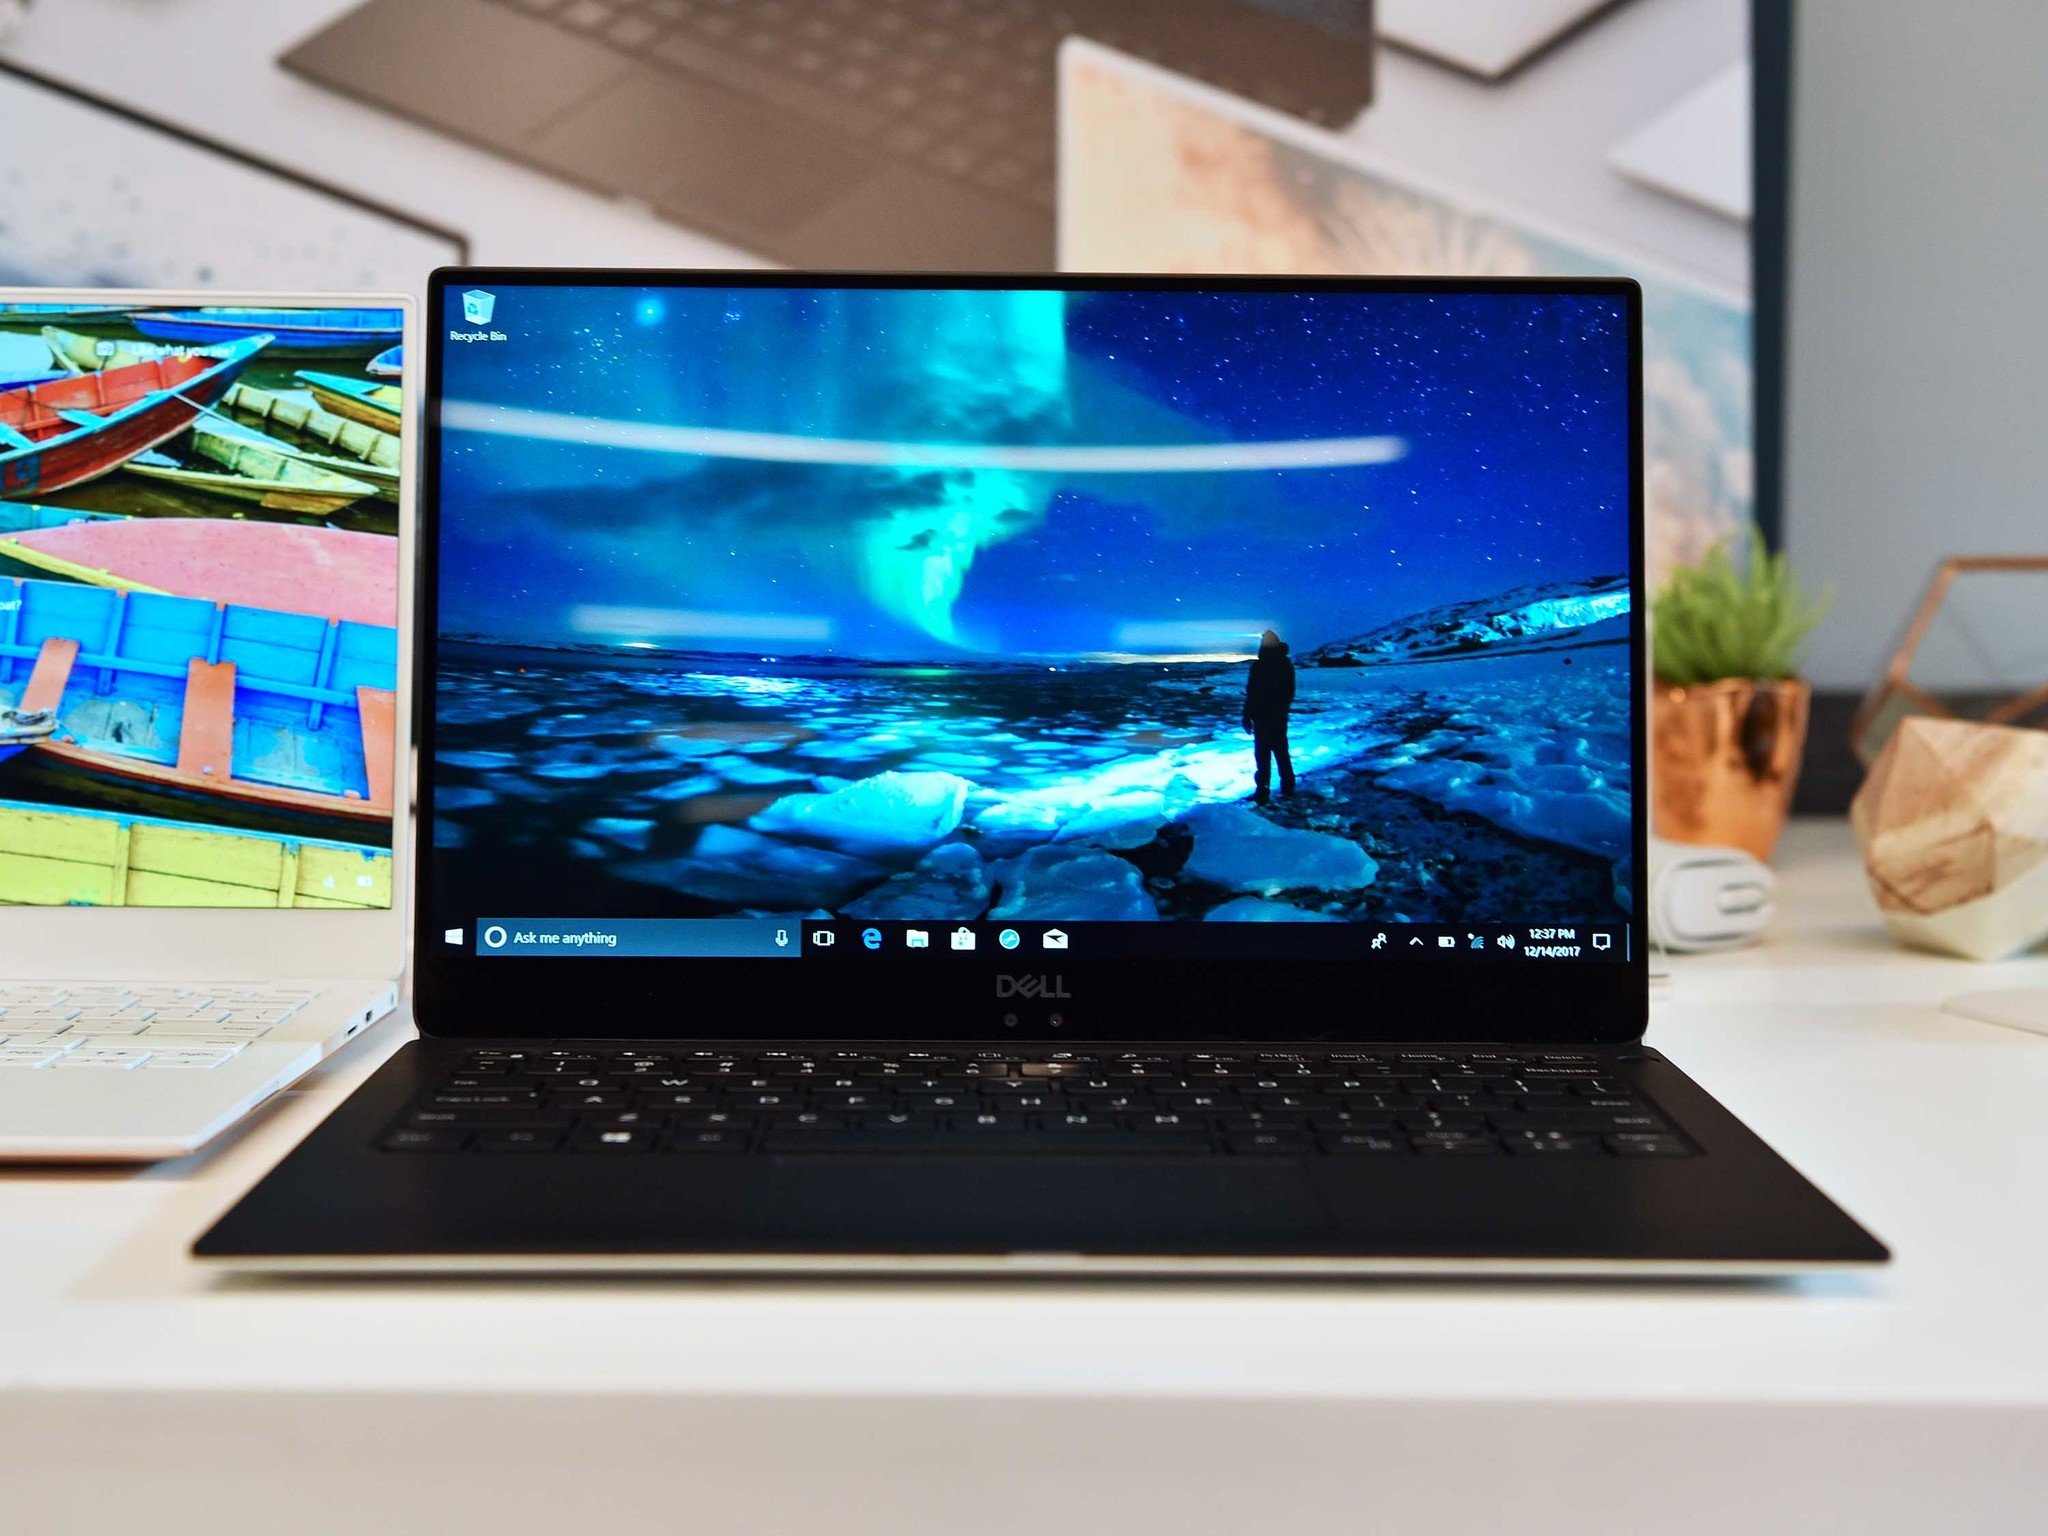 Dell Announces The New XPS 13 In The Run-up To CES 2018